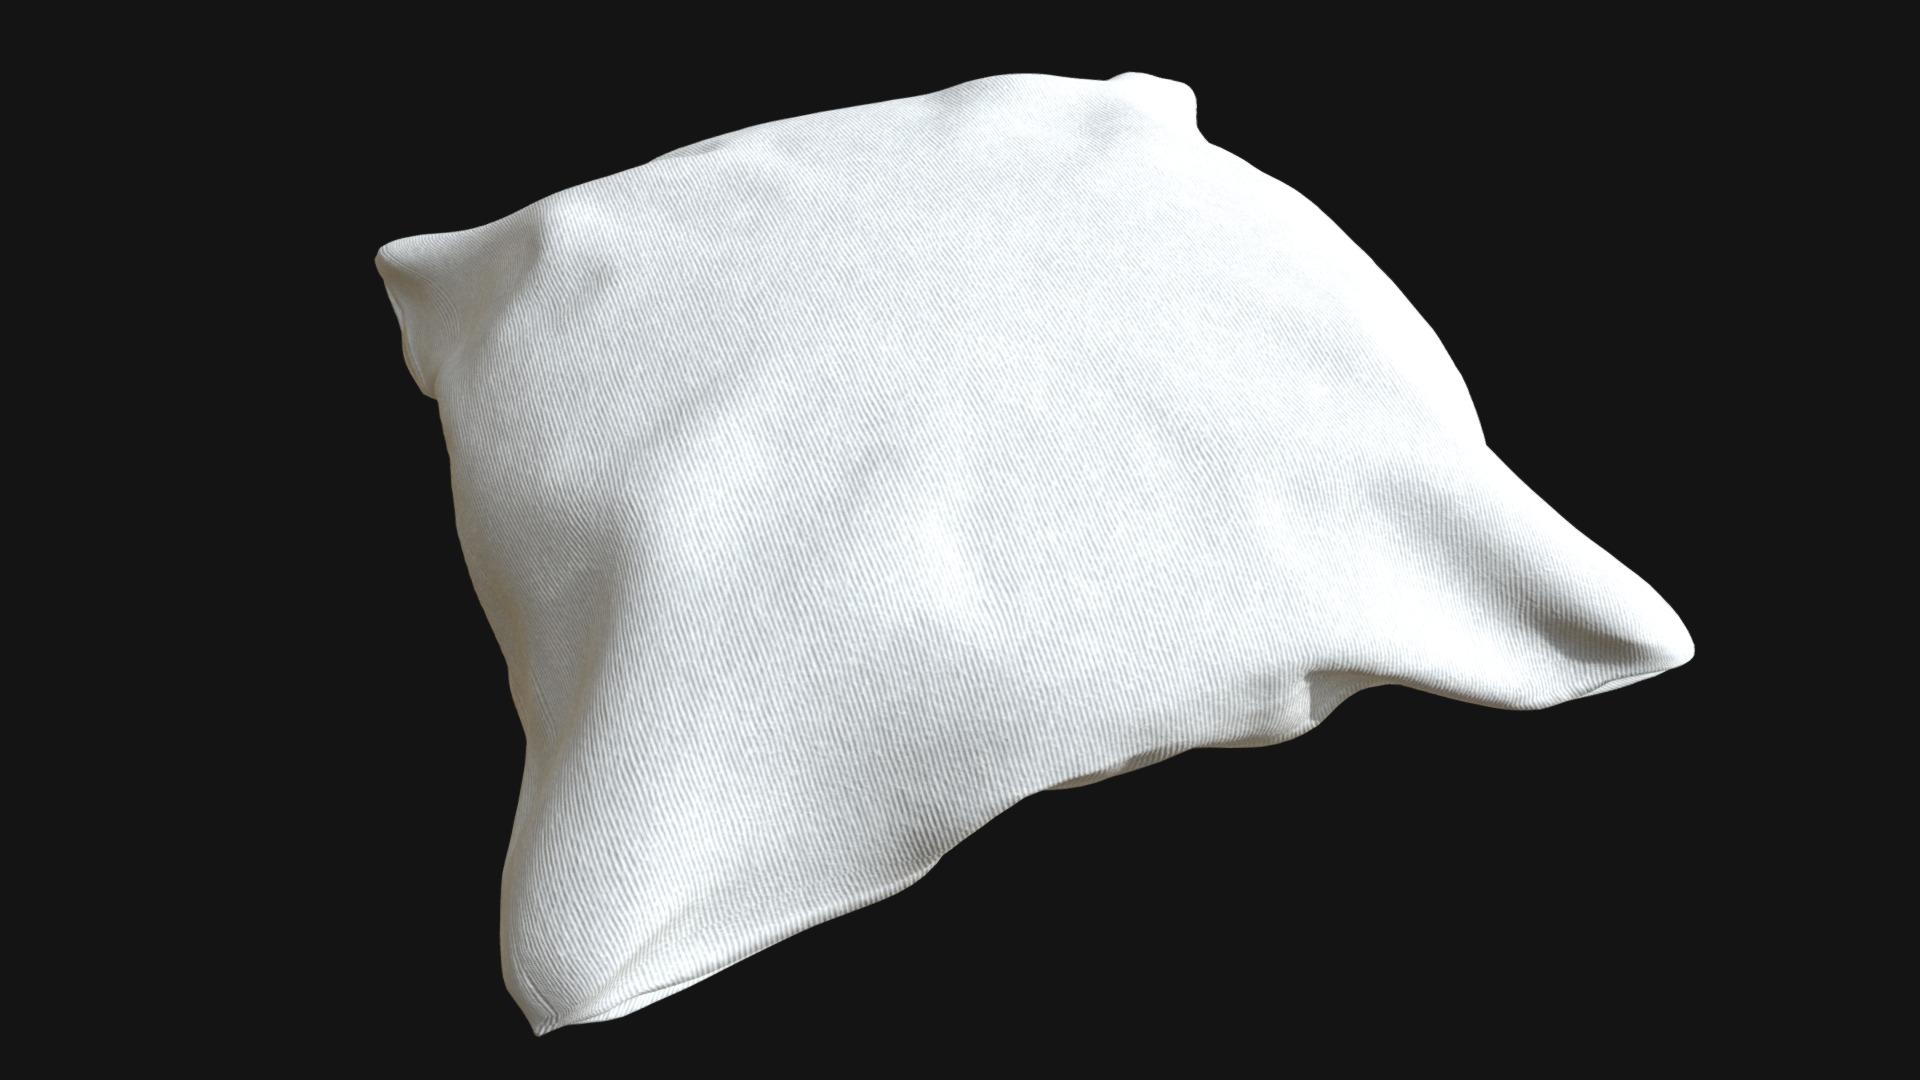 3D model Small cushion - This is a 3D model of the Small cushion. The 3D model is about a white glove on a black background.